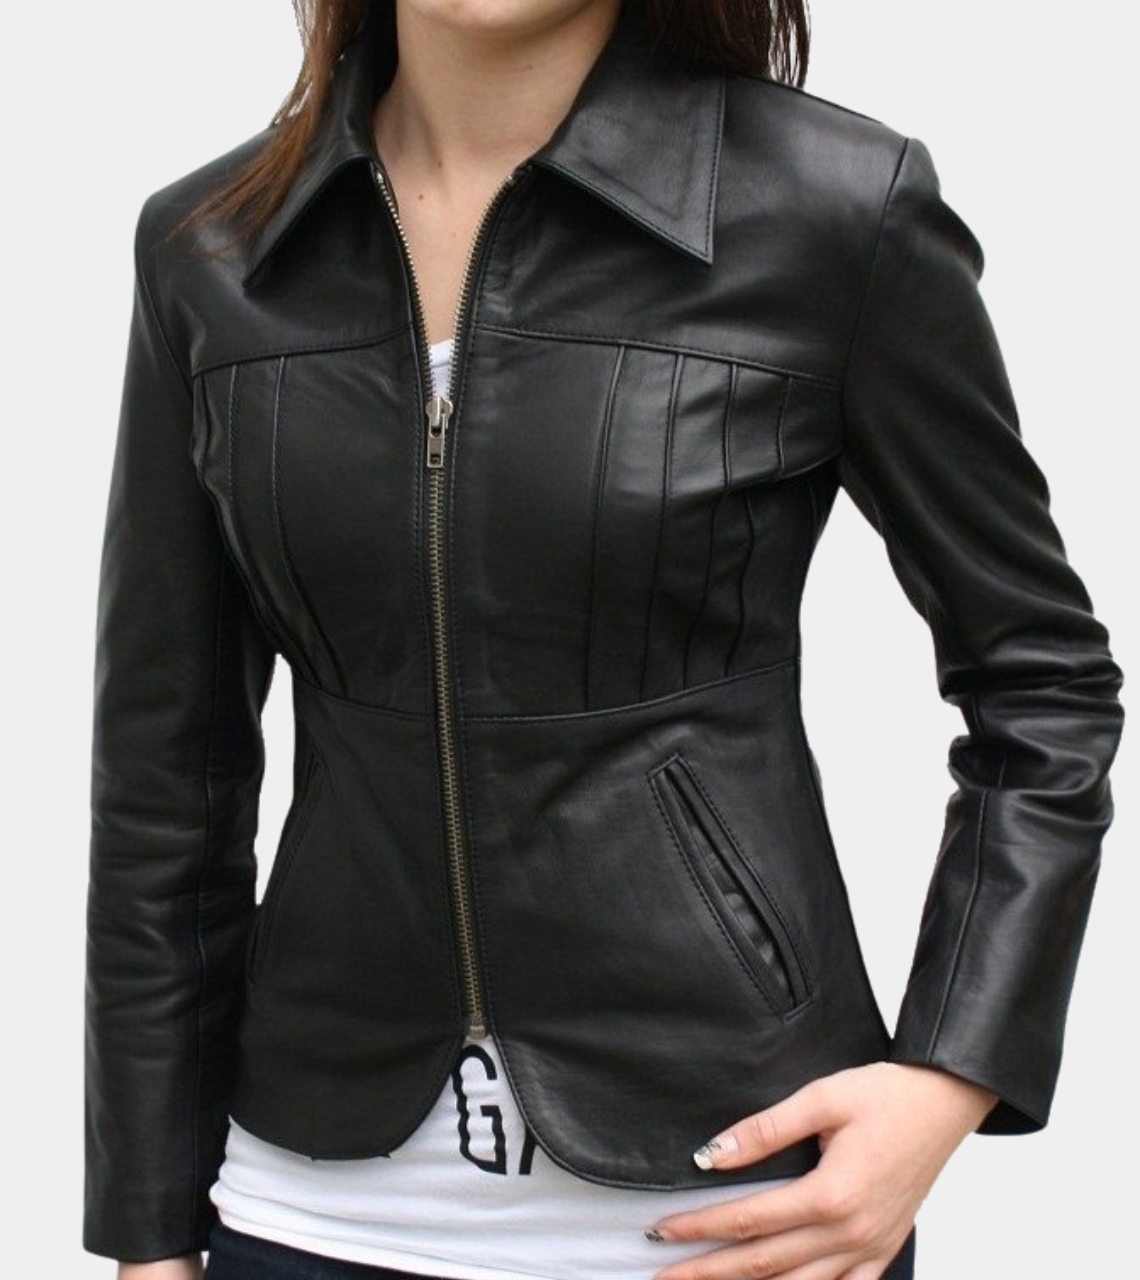 FitBust Black Leather Jacket For Women's